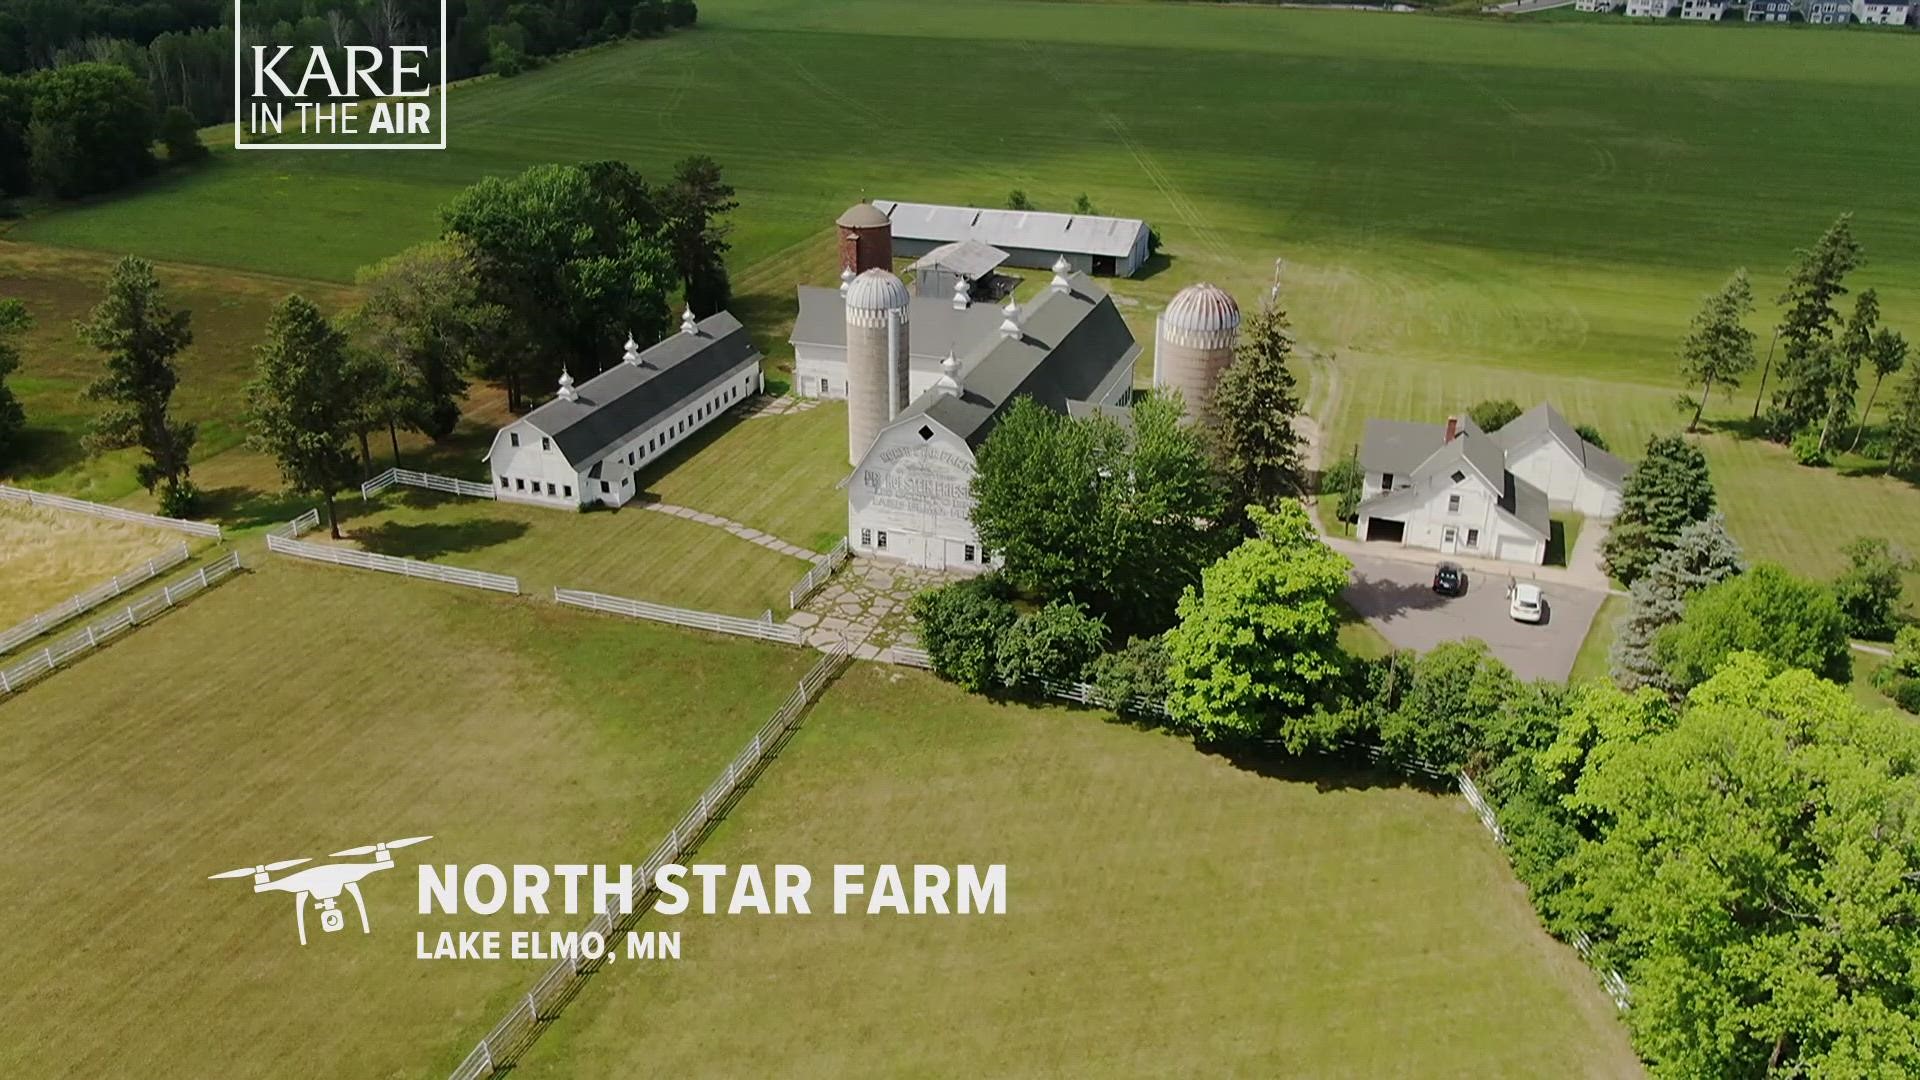 Our ongoing drone series takes us "barn hopping" over a farm and iconic barn that once played a role in the creamy goodness of Milky Way candy bars.